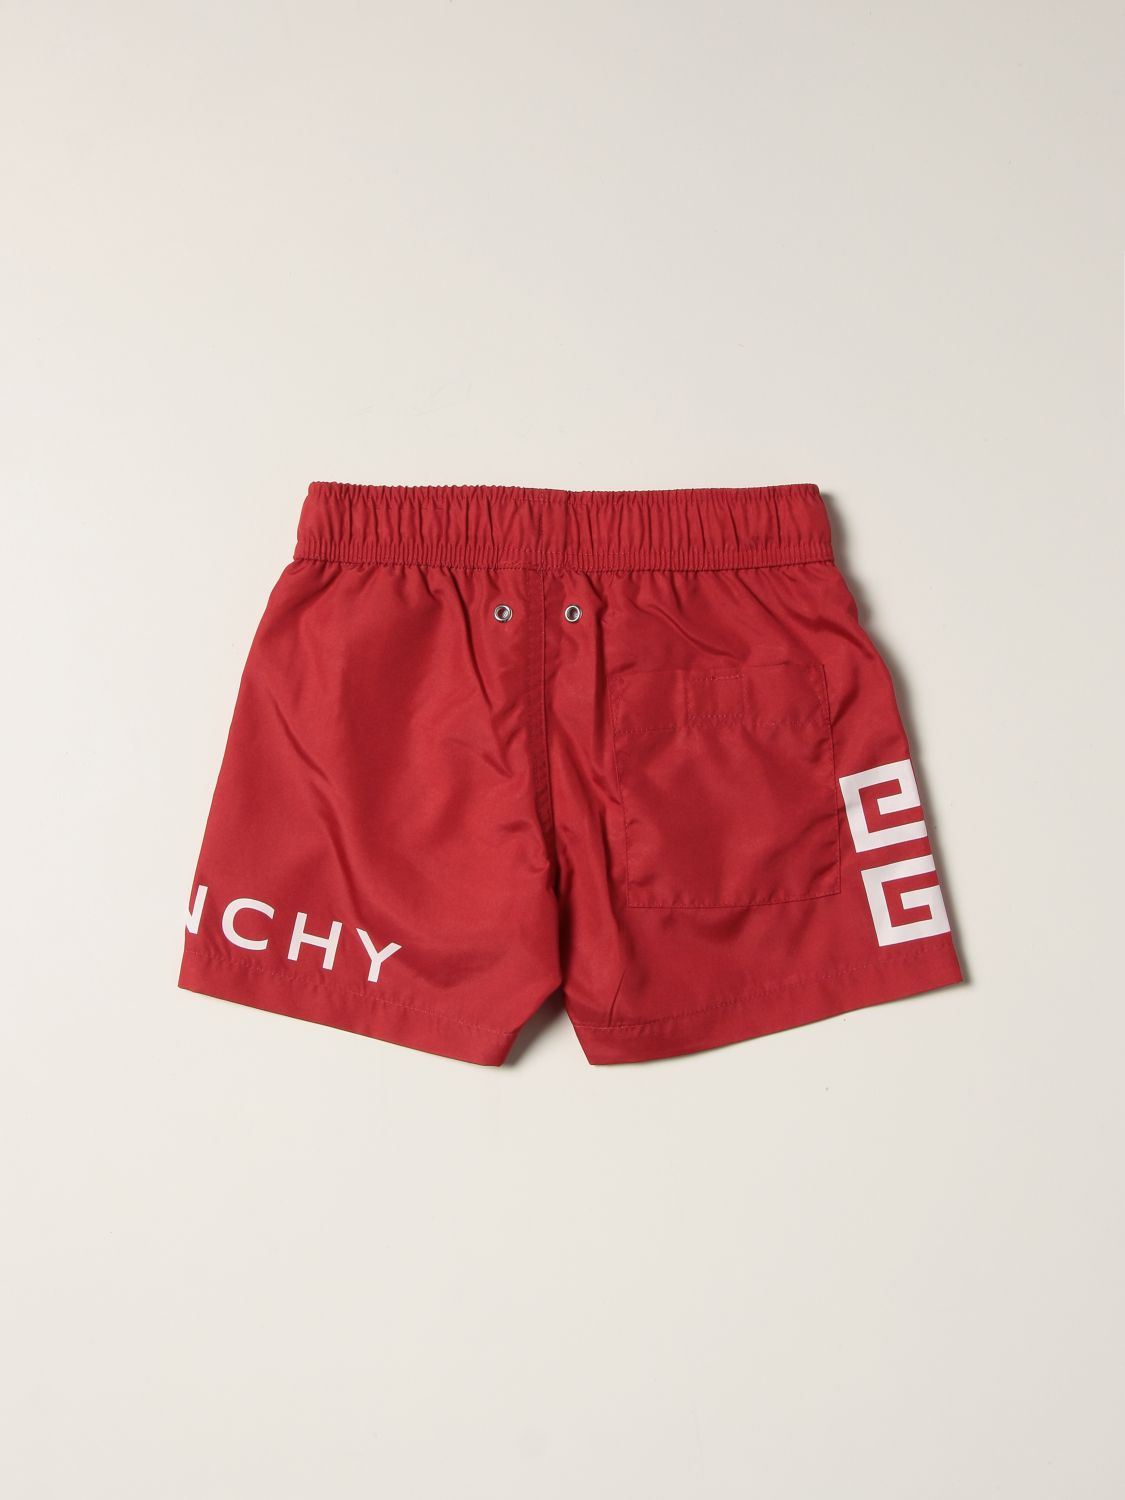 Swimsuit Givenchy: Givenchy swim trunks with logo red 2